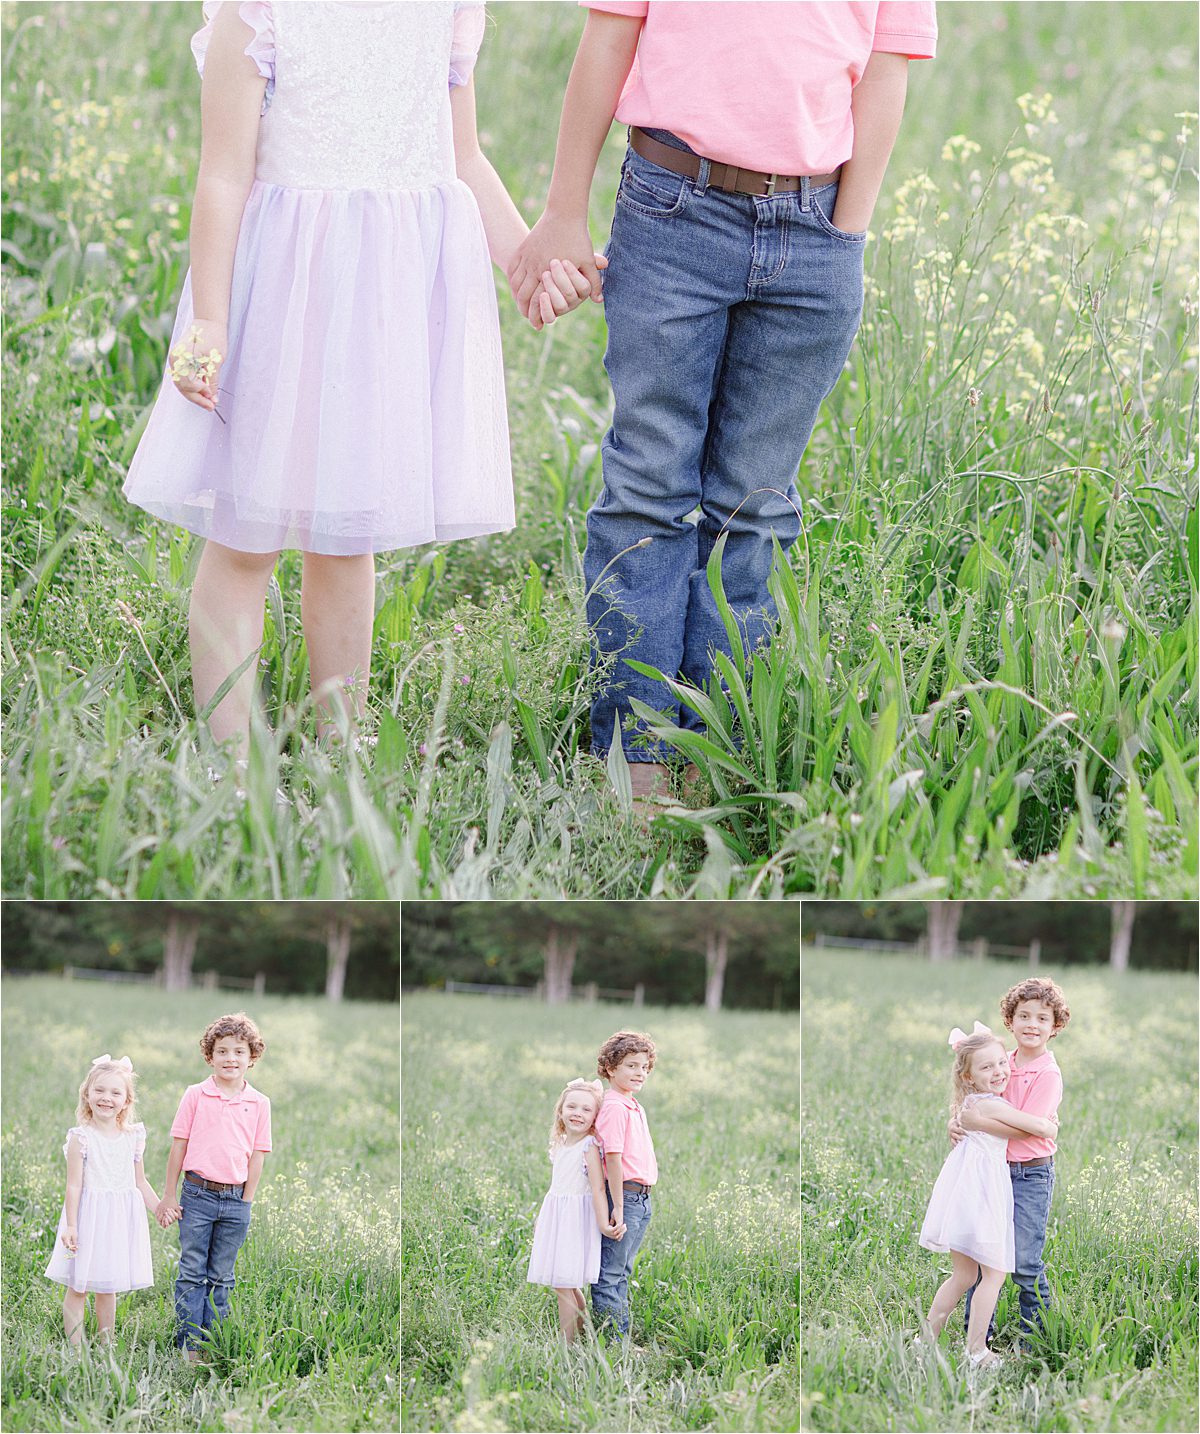 Athens, GA spring children's pictures in a field with wildflowers.